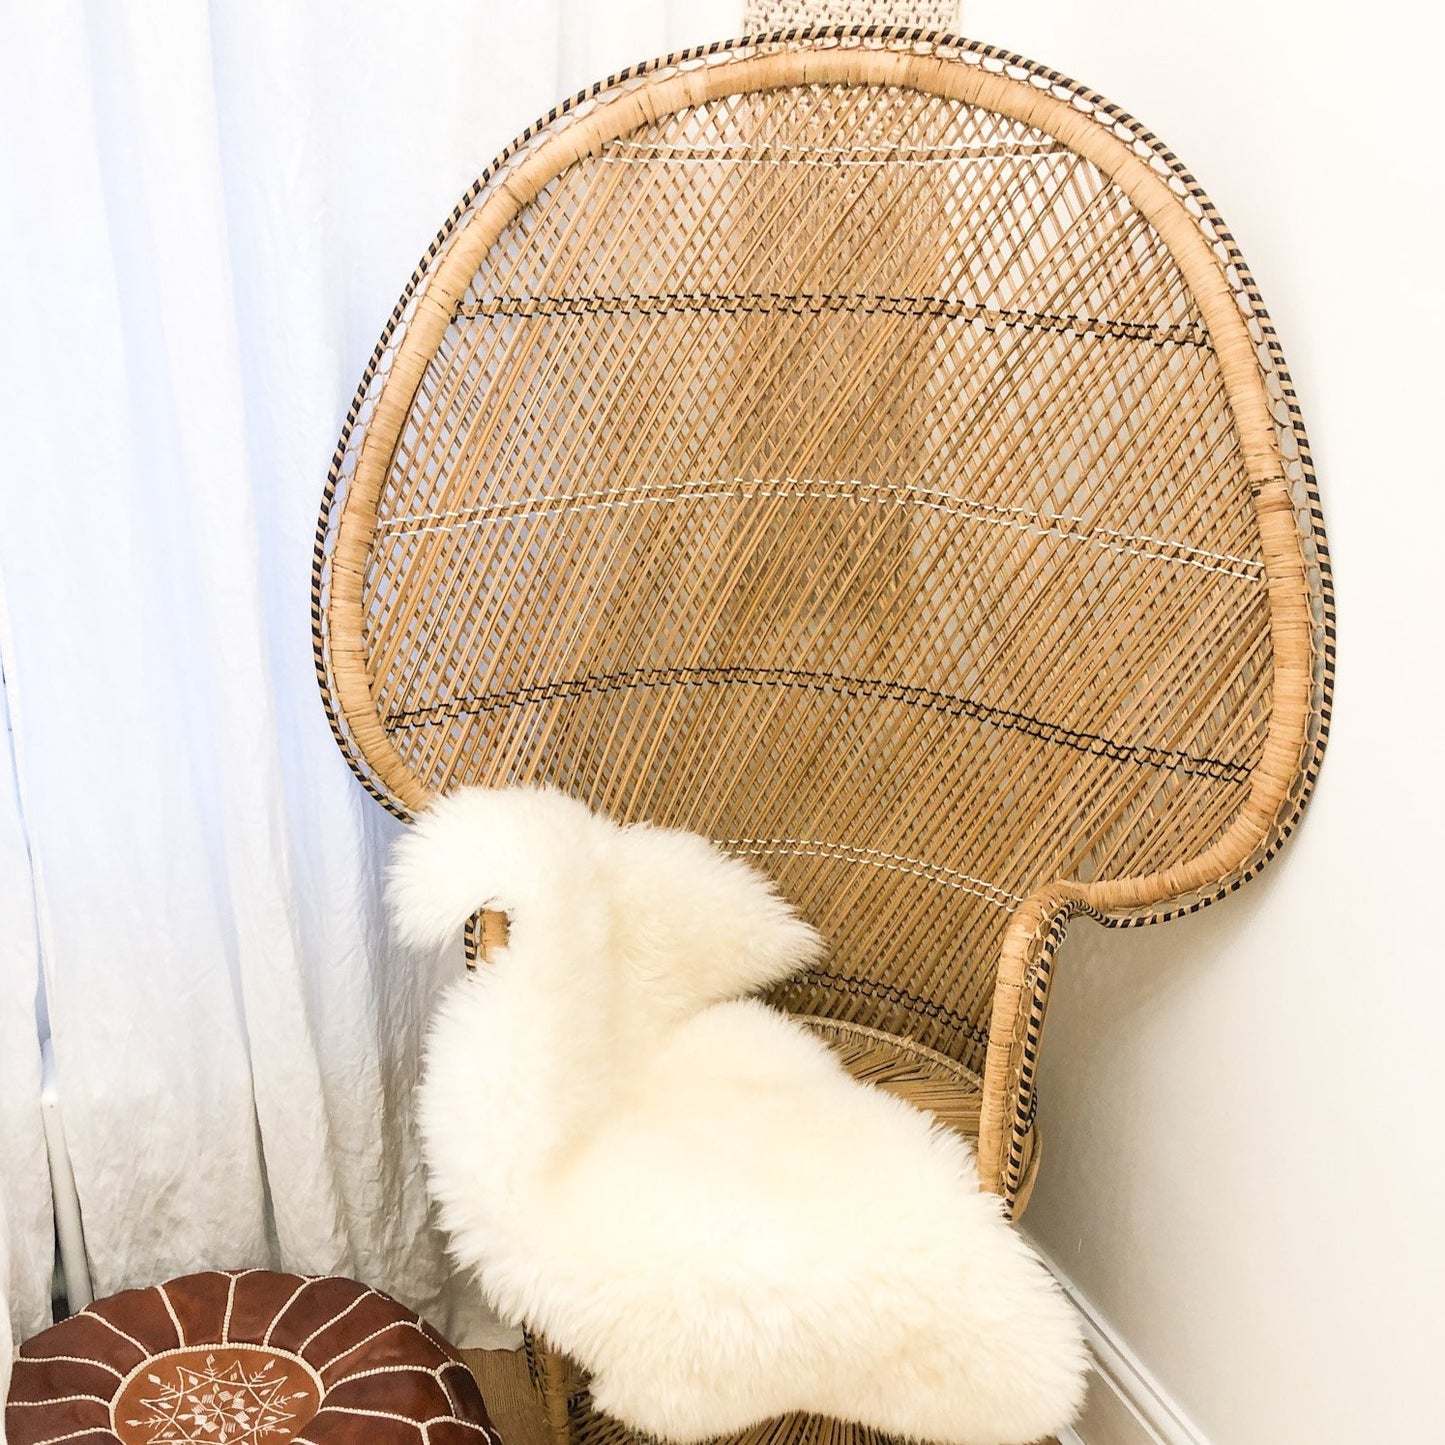 Large Vintage 1970s Peacock Chair